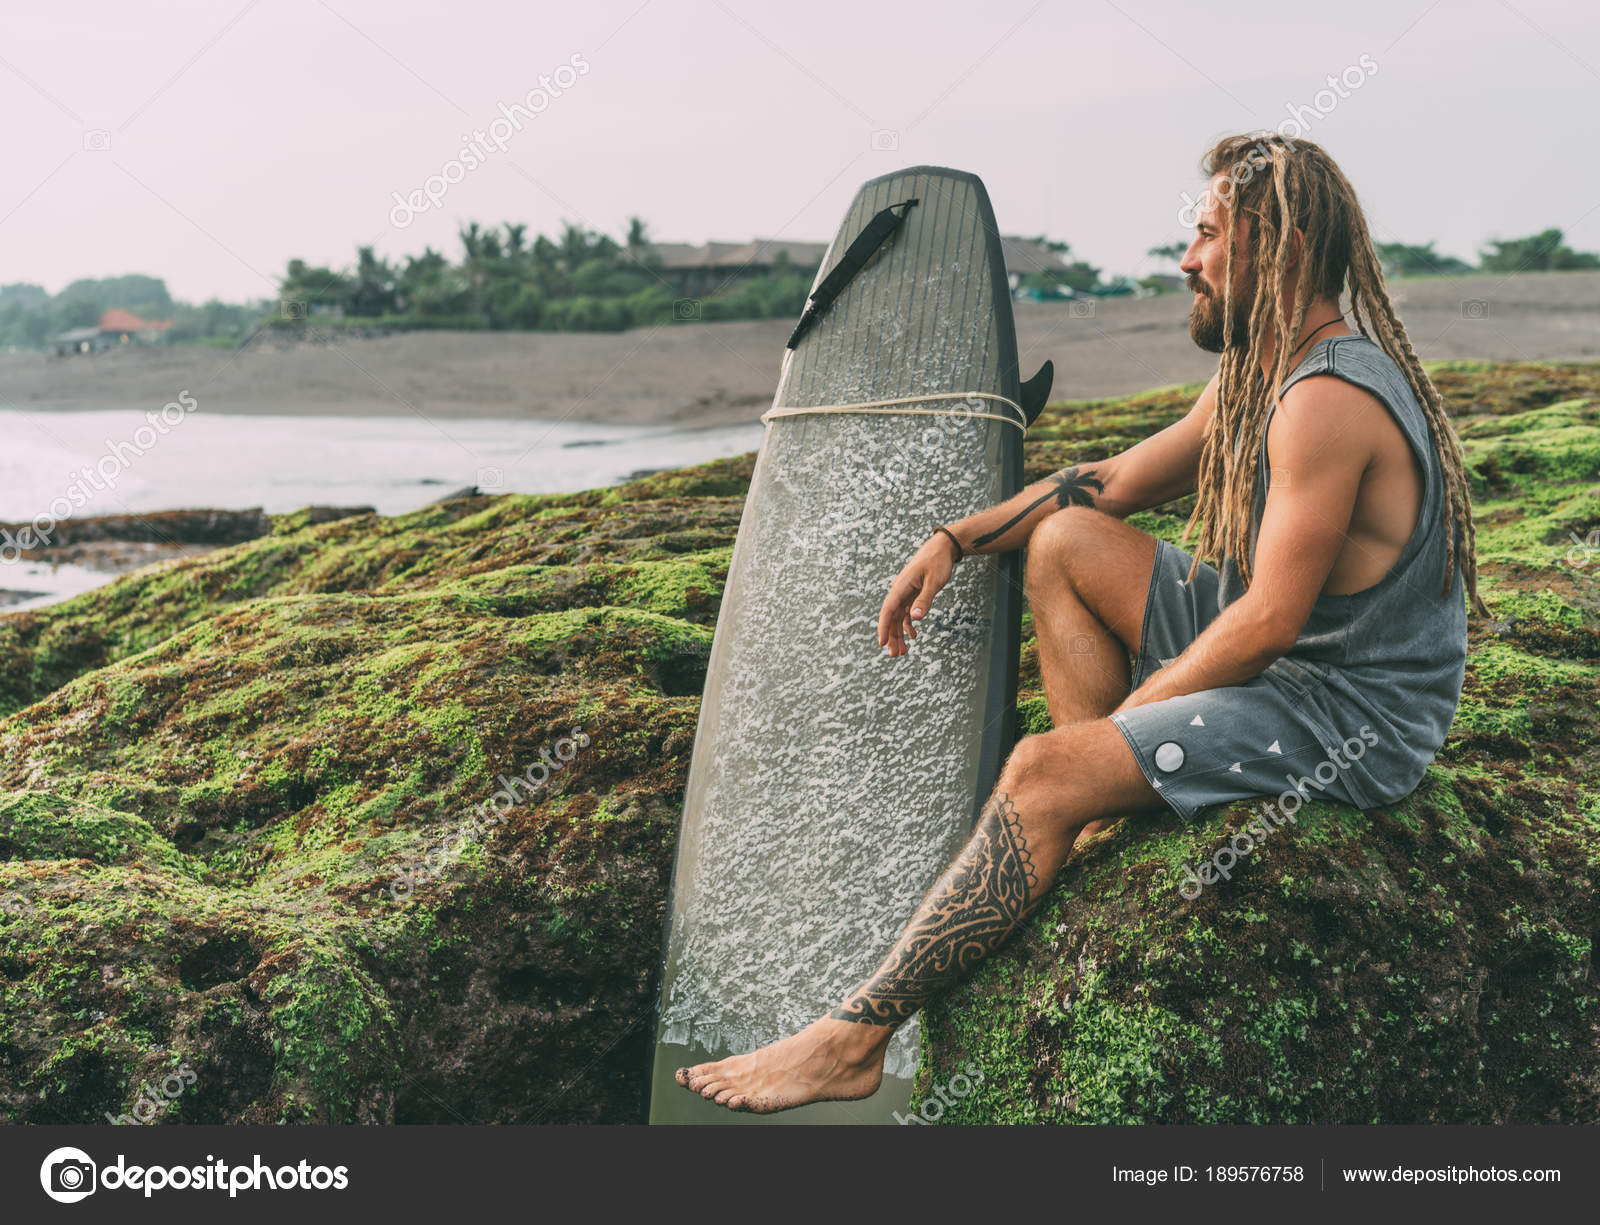 735 Surf Tattoos Stock Photos HighRes Pictures and Images  Getty Images